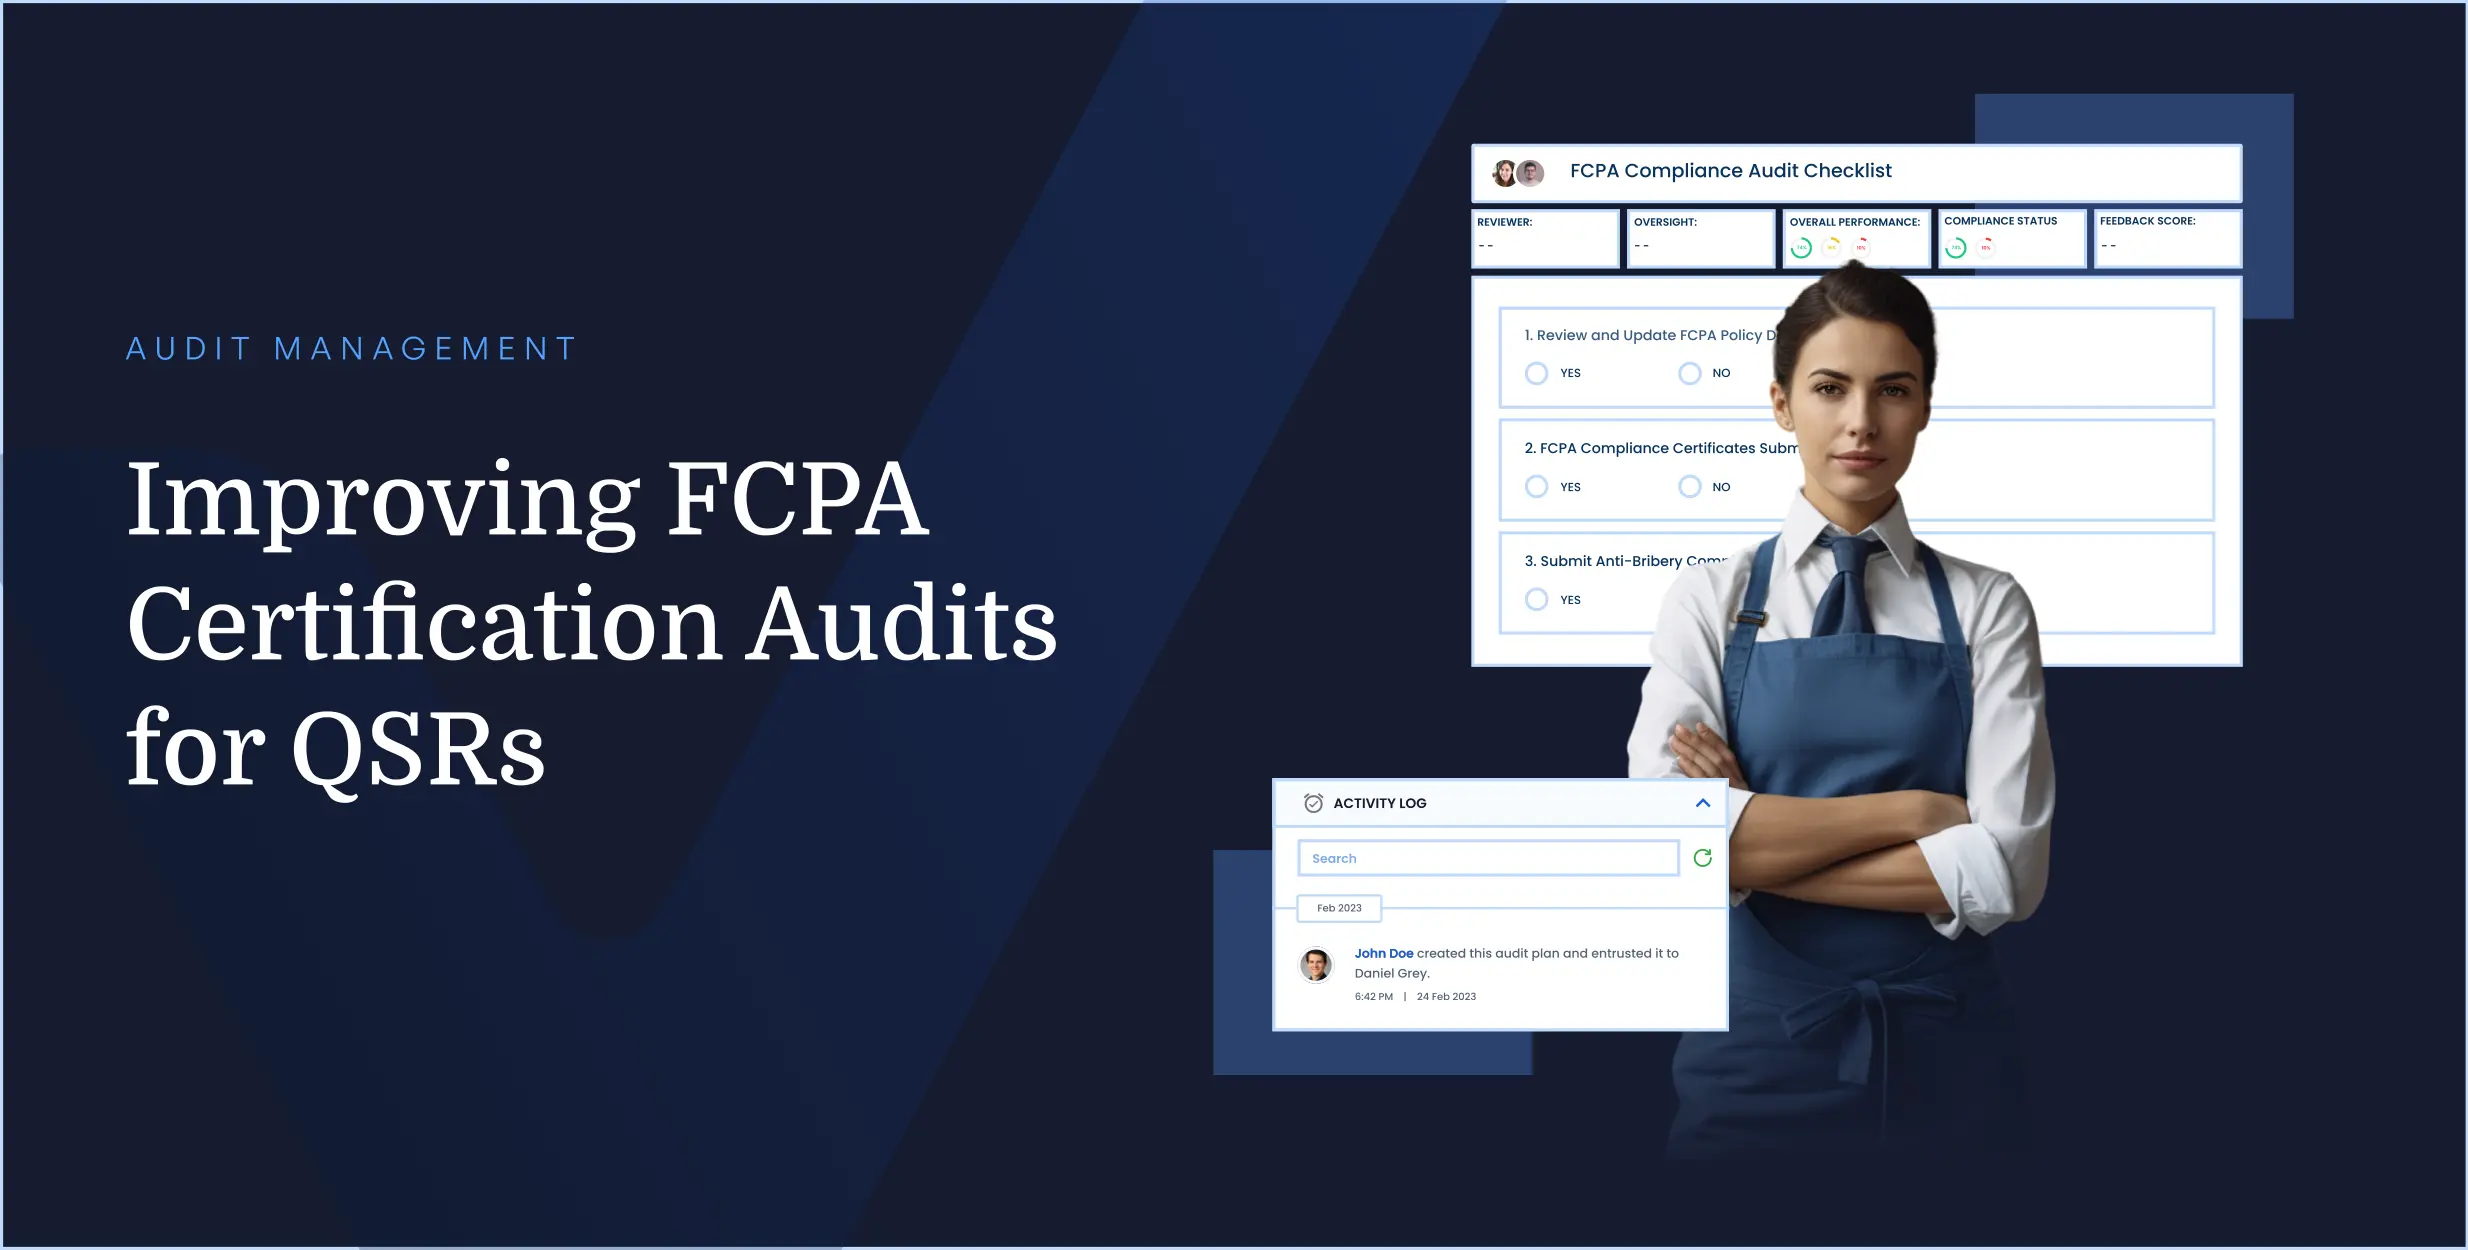 Improving FCPA Certification Audits for QSRs